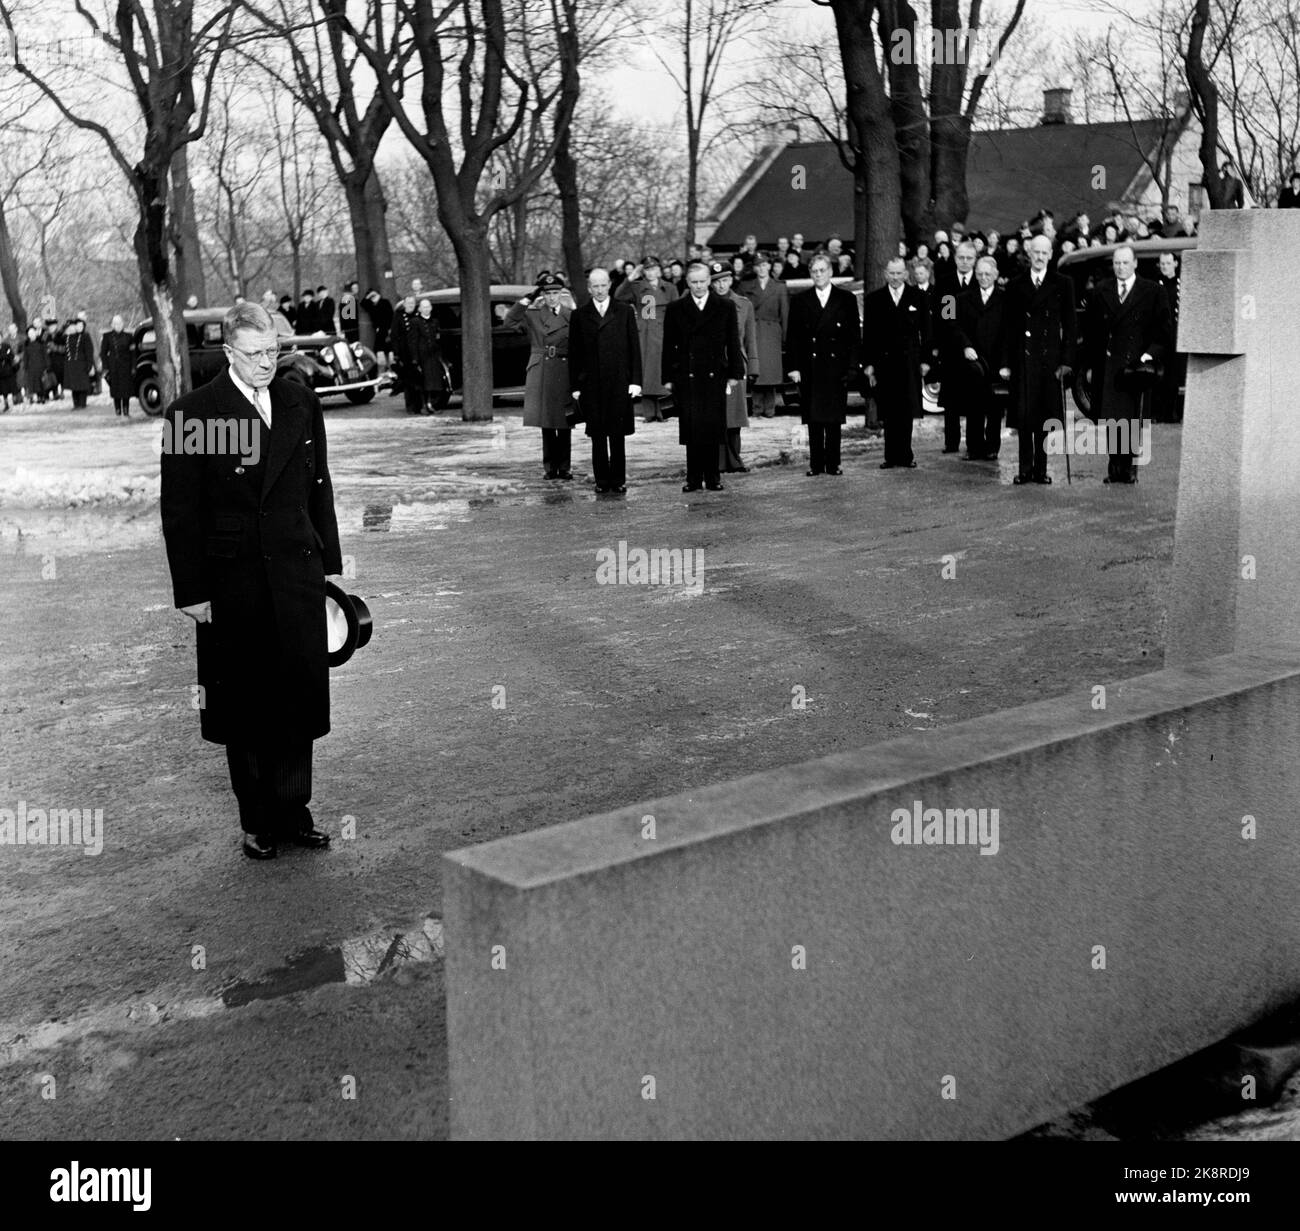 Oslo 1952. King Gustaf Adolf and Queen Louise from Sweden are officially visited in Norway. Here we see King Gustaf Adolf put a wreath on the monument to fallen Norwegians at Akershus. Photo: Sverre A. Børretzen / Current / NTB Stock Photo